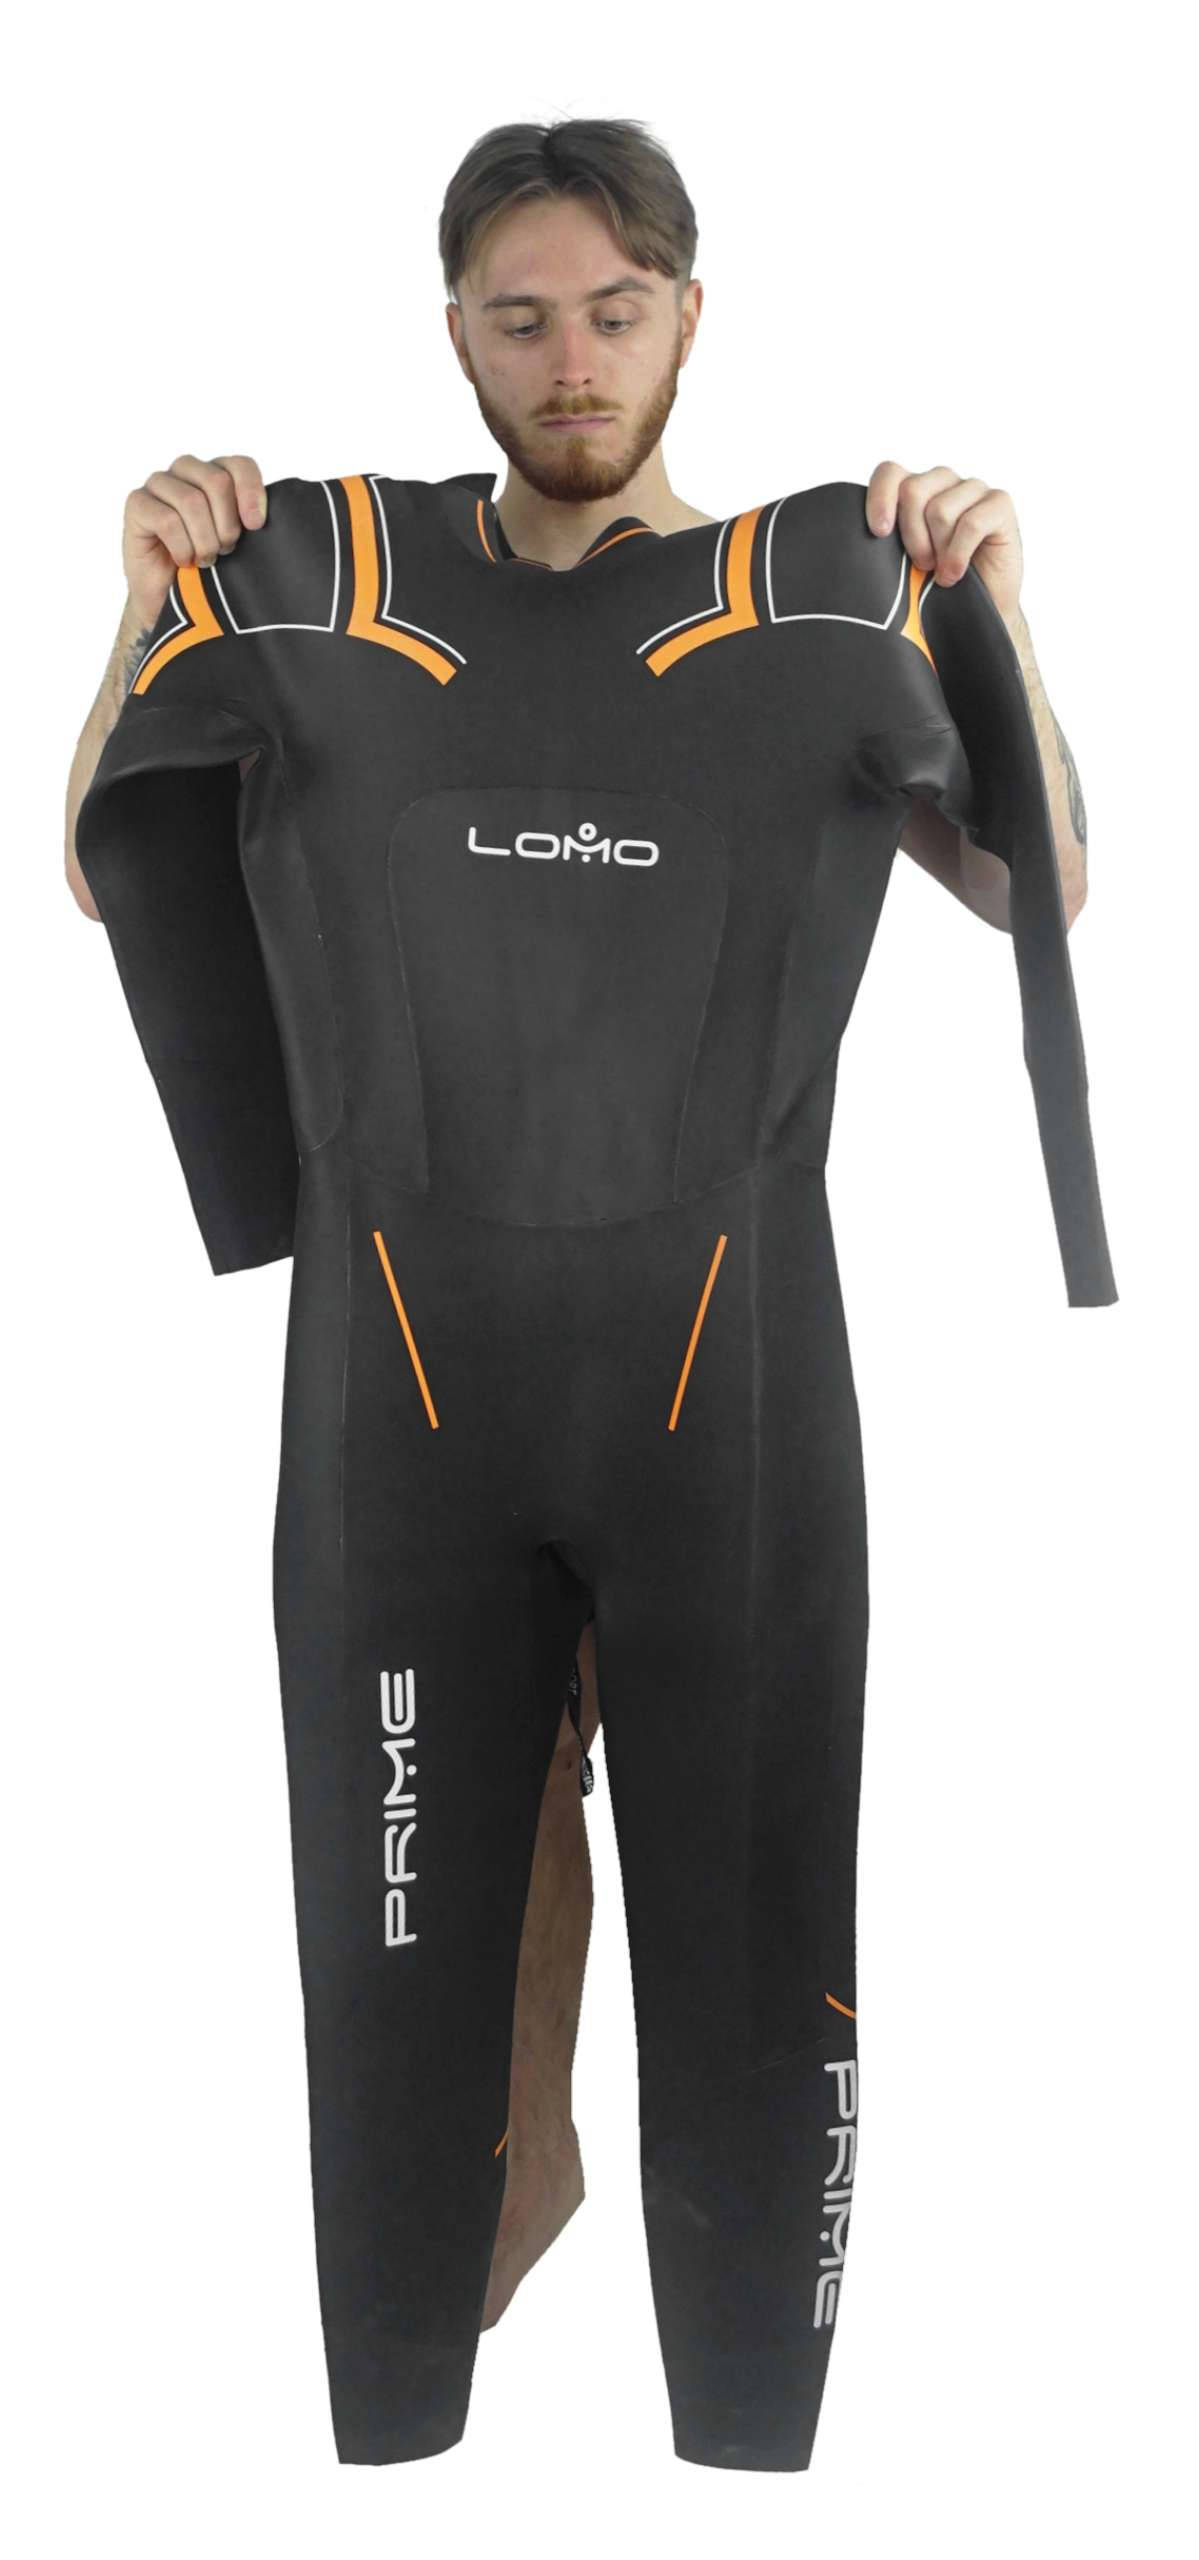 How Tight Should a Wetsuit Be? - Wetsuit Wearhouse Blog